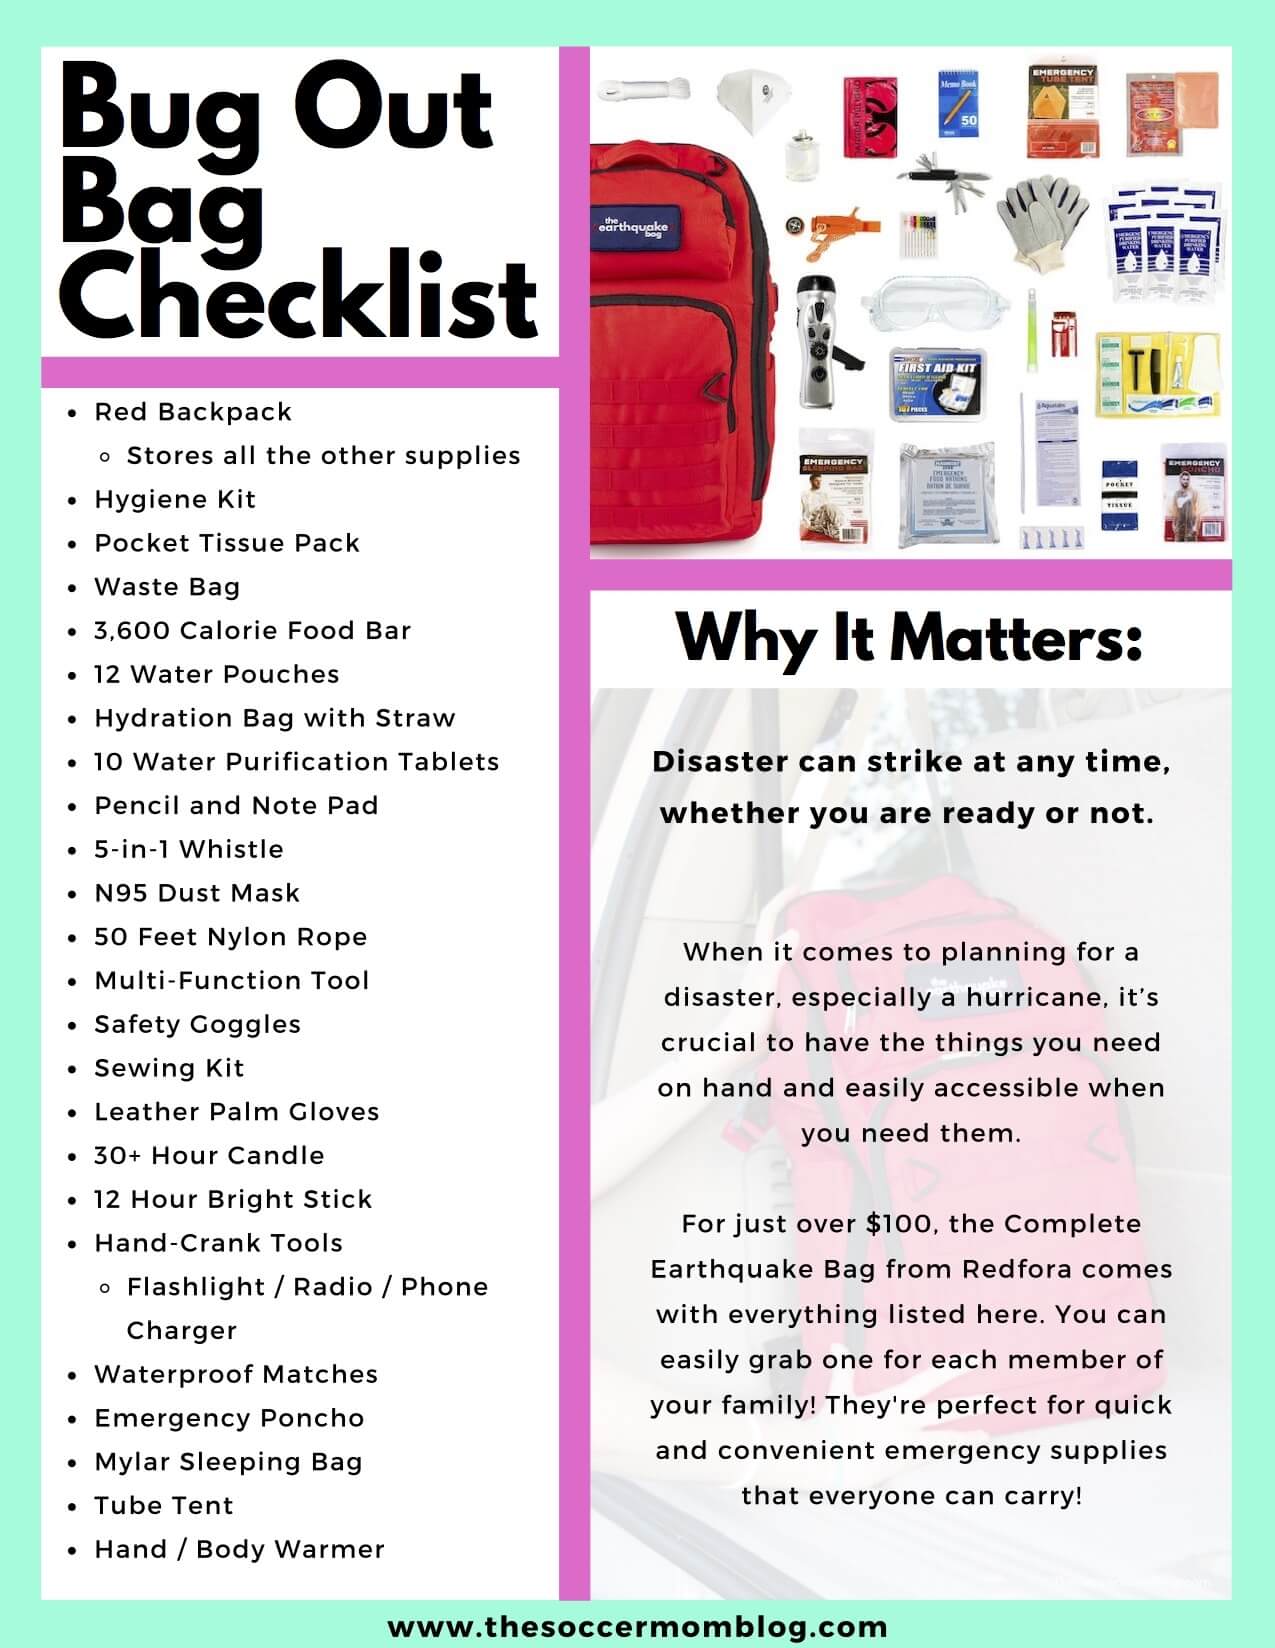 Learn what to pack in a bug out bag for emergencies and make sure you're ready for anything with our printable bug out bag checklist!